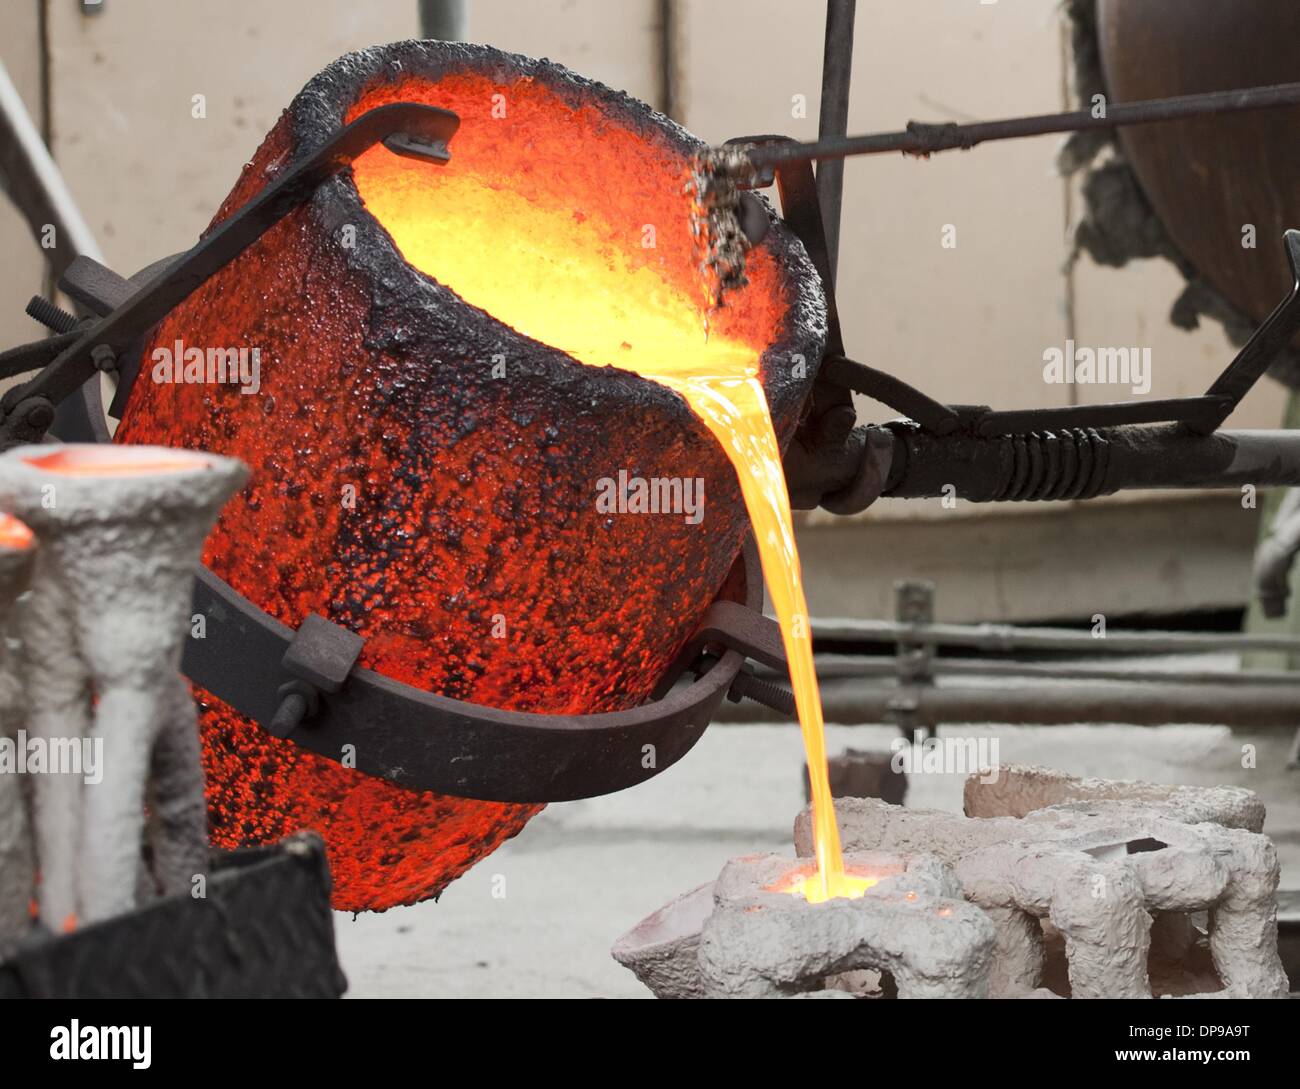 Burbank, California, USA. 9th Jan, 2014. Molten bronze is poured from a red hot cauldron on Thursday morning as metal workers at the American Fine Arts Foundry pour the statuettes that will be this year's SAG award.----Skilled craftsmen led by Master Founder Enrique Guerrero at the American Fine Arts Foundry in Burbank poured some of the last award statuettes for this years Screen Actors Guild Awards to be held January 18, 2014. Credit:  ZUMA Press, Inc./Alamy Live News Stock Photo